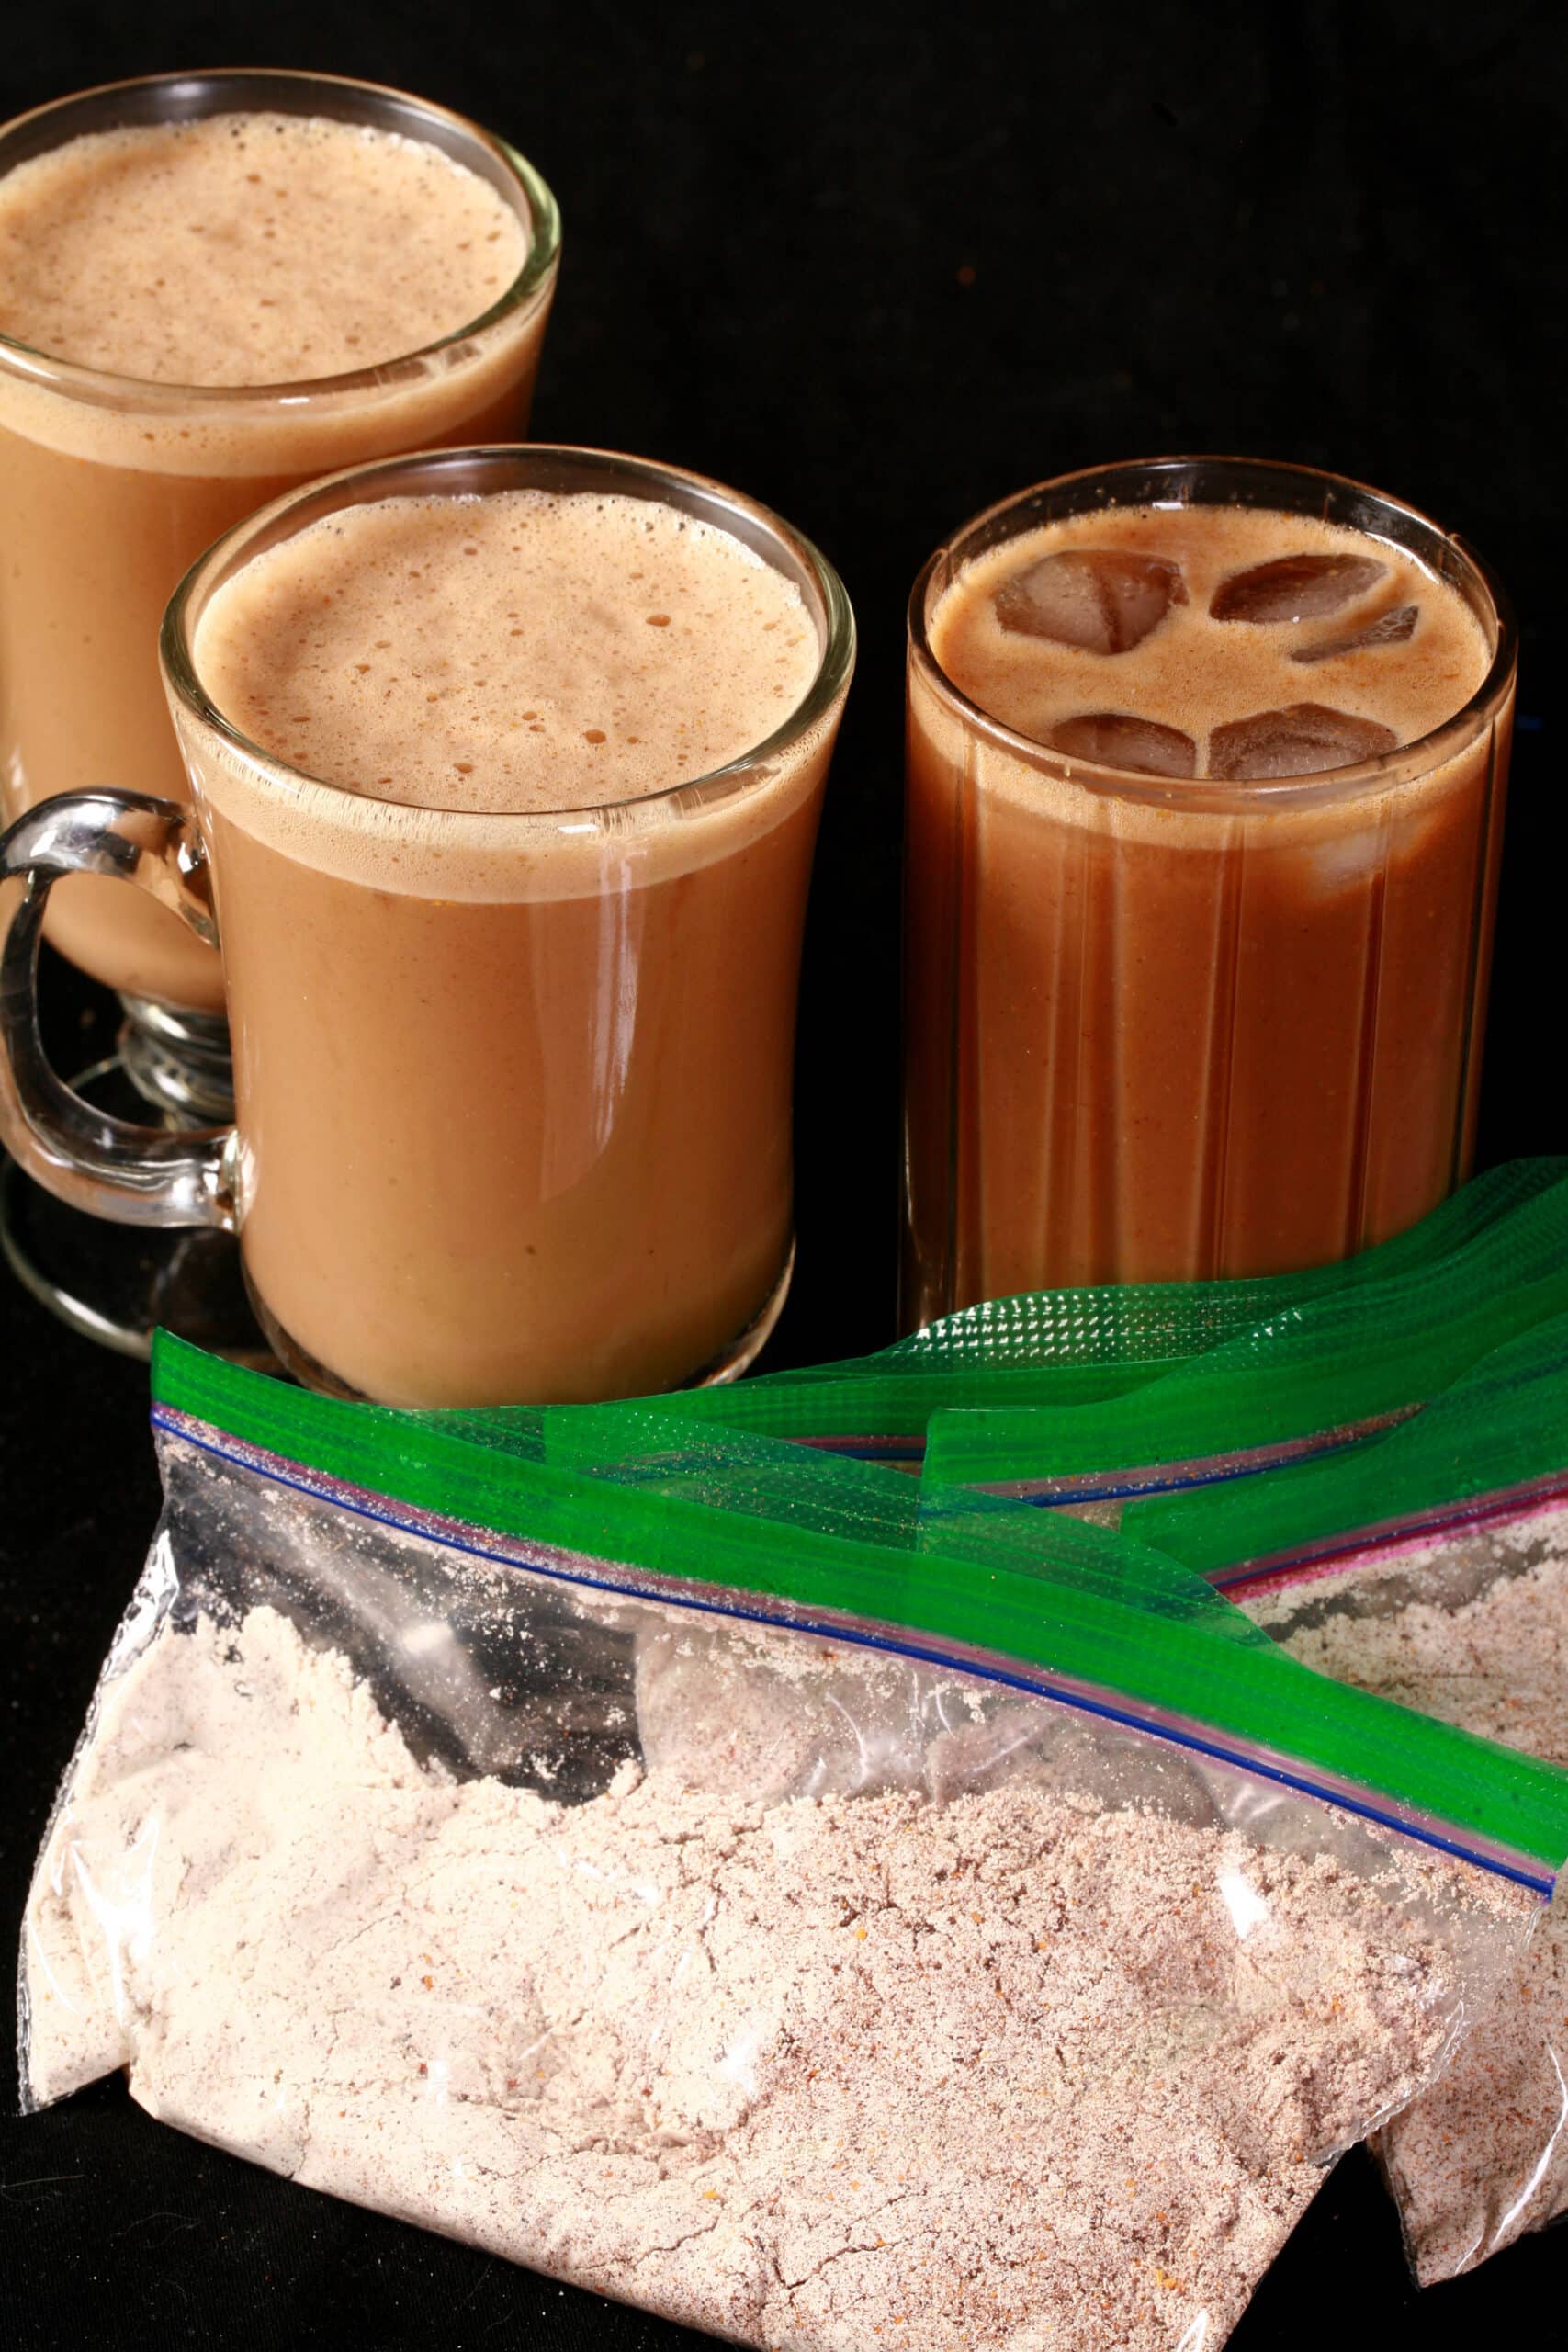 A protein powder iced pumpkin spice latte, 2 keto pumpkin spice lattes, and several bags of mix to make them.